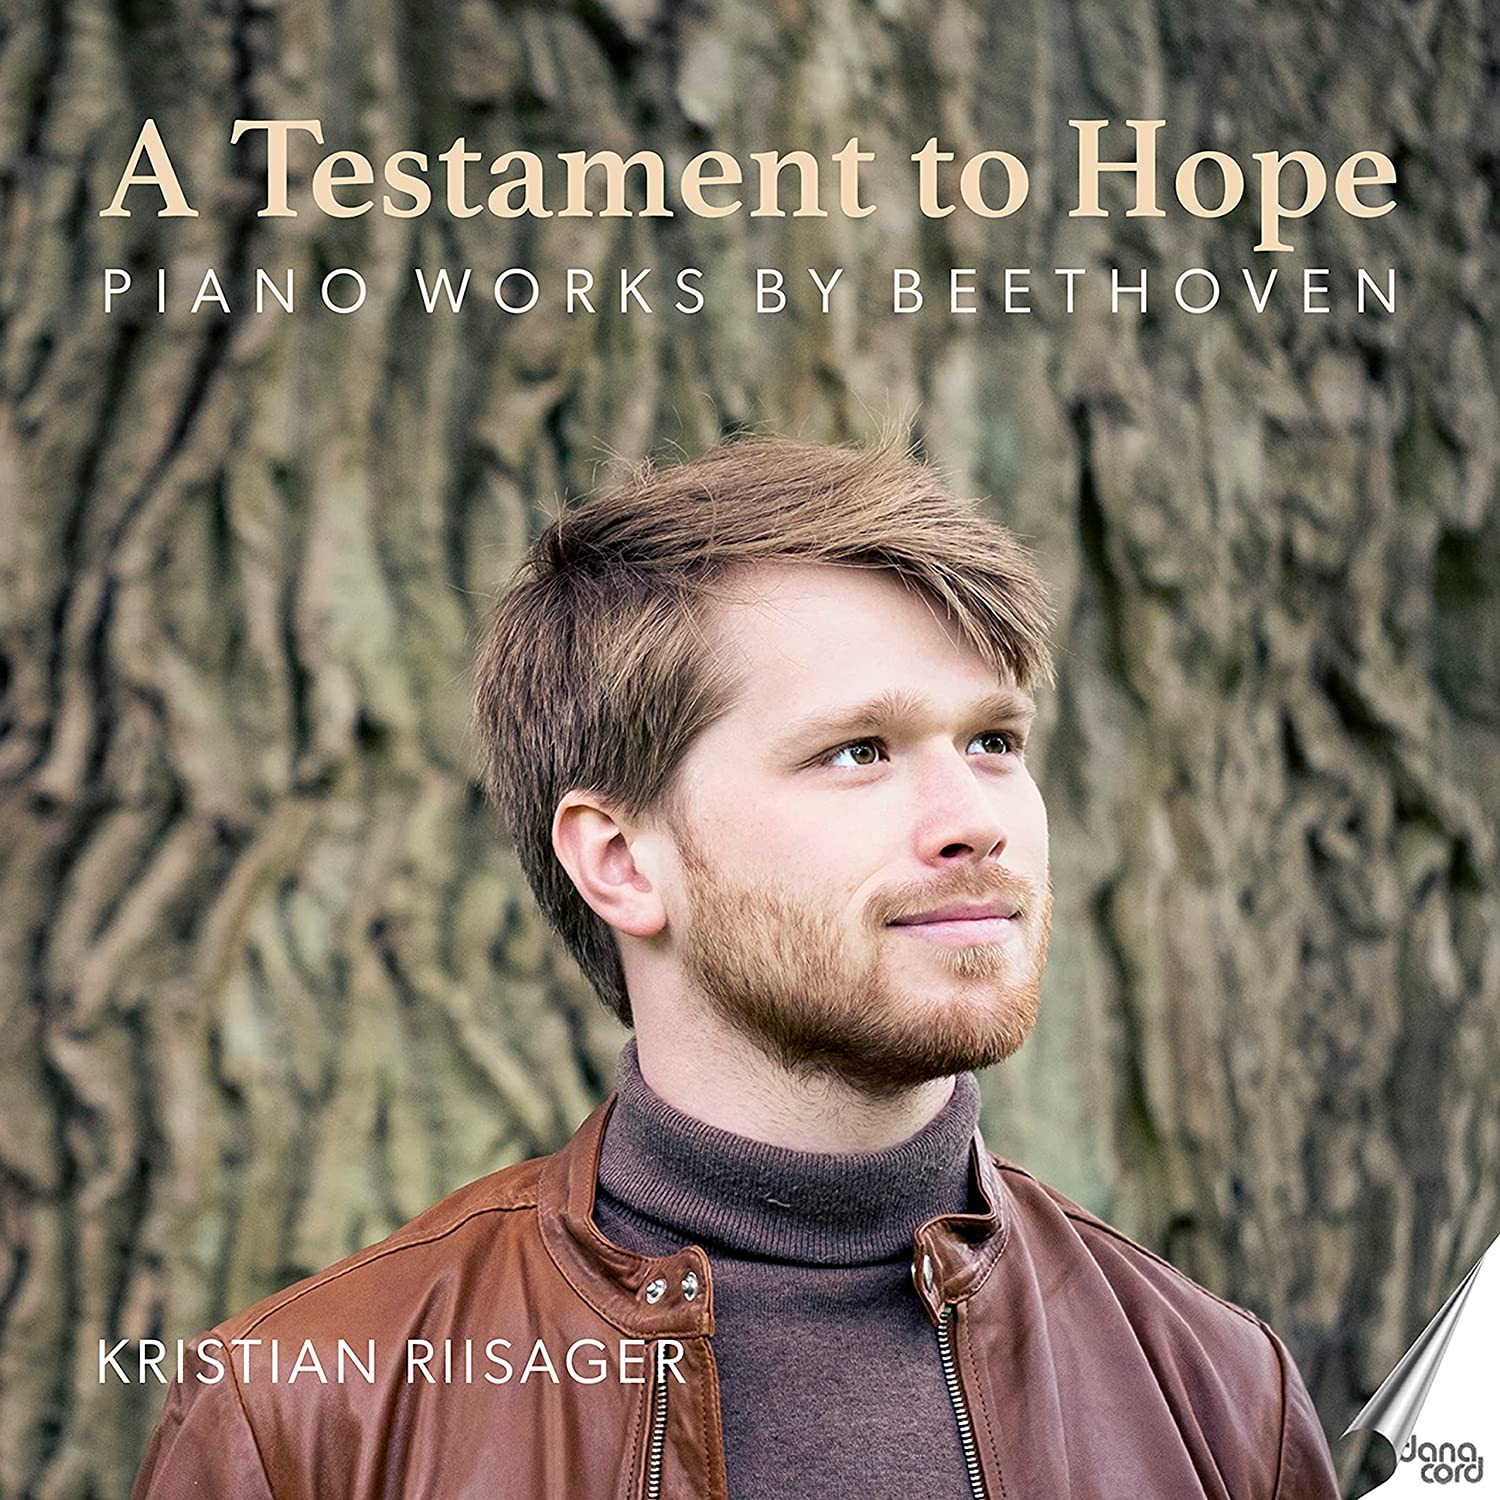 A TESTAMENT TO HOPE - PIANOWORKS BY BEETHOVEN